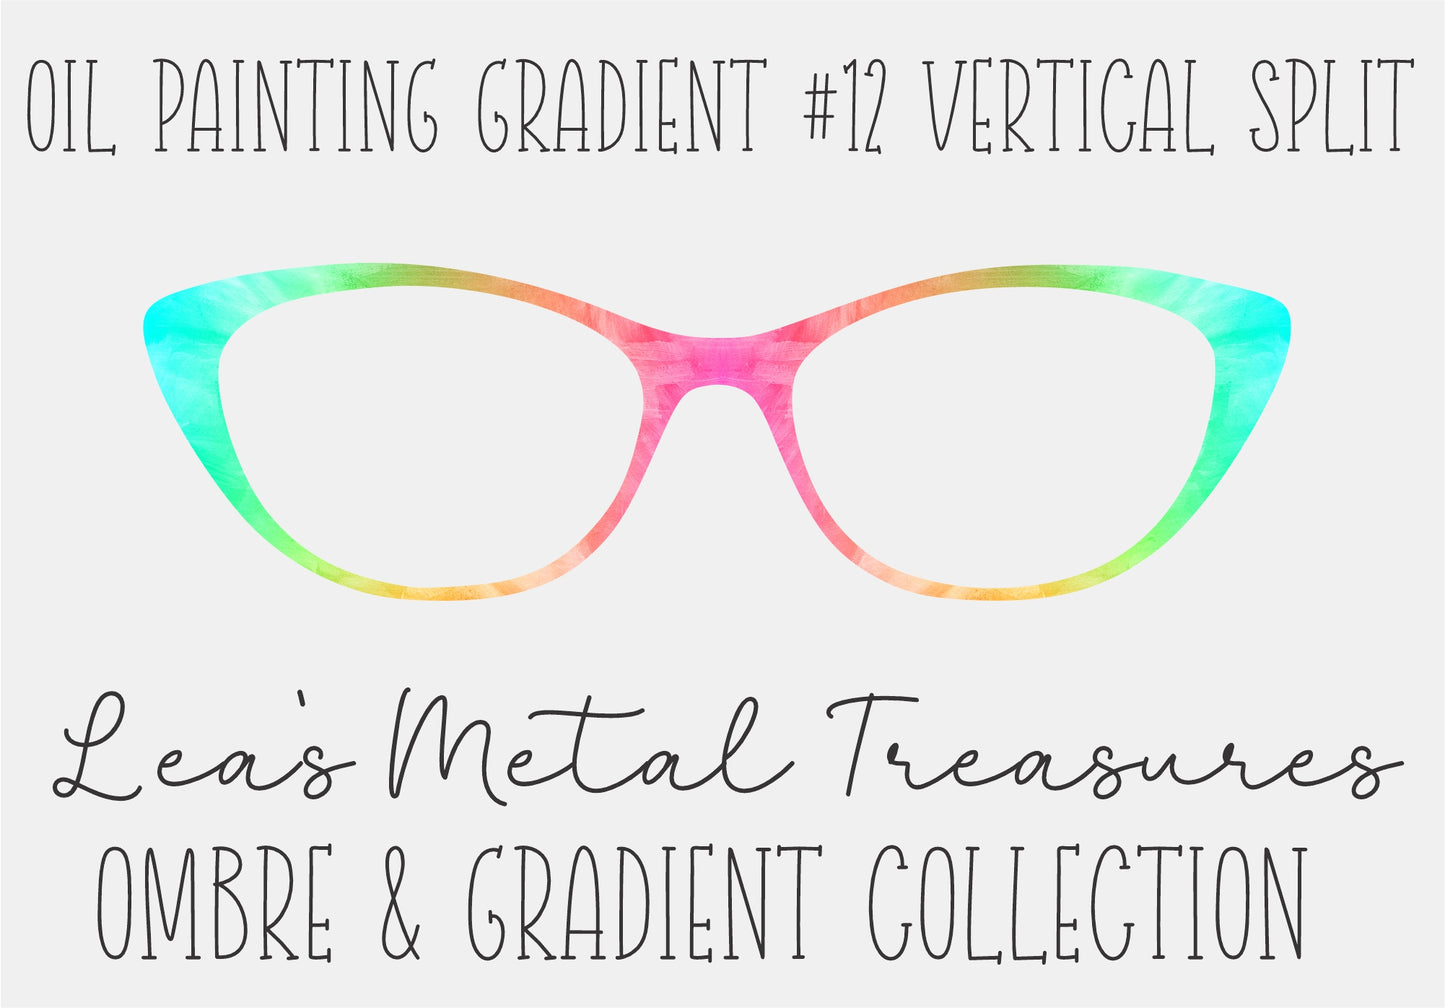 OIL PAINTING GRADIENT 12 VERTICAL STRIPE Eyewear Frame Toppers COMES WITH MAGNETS